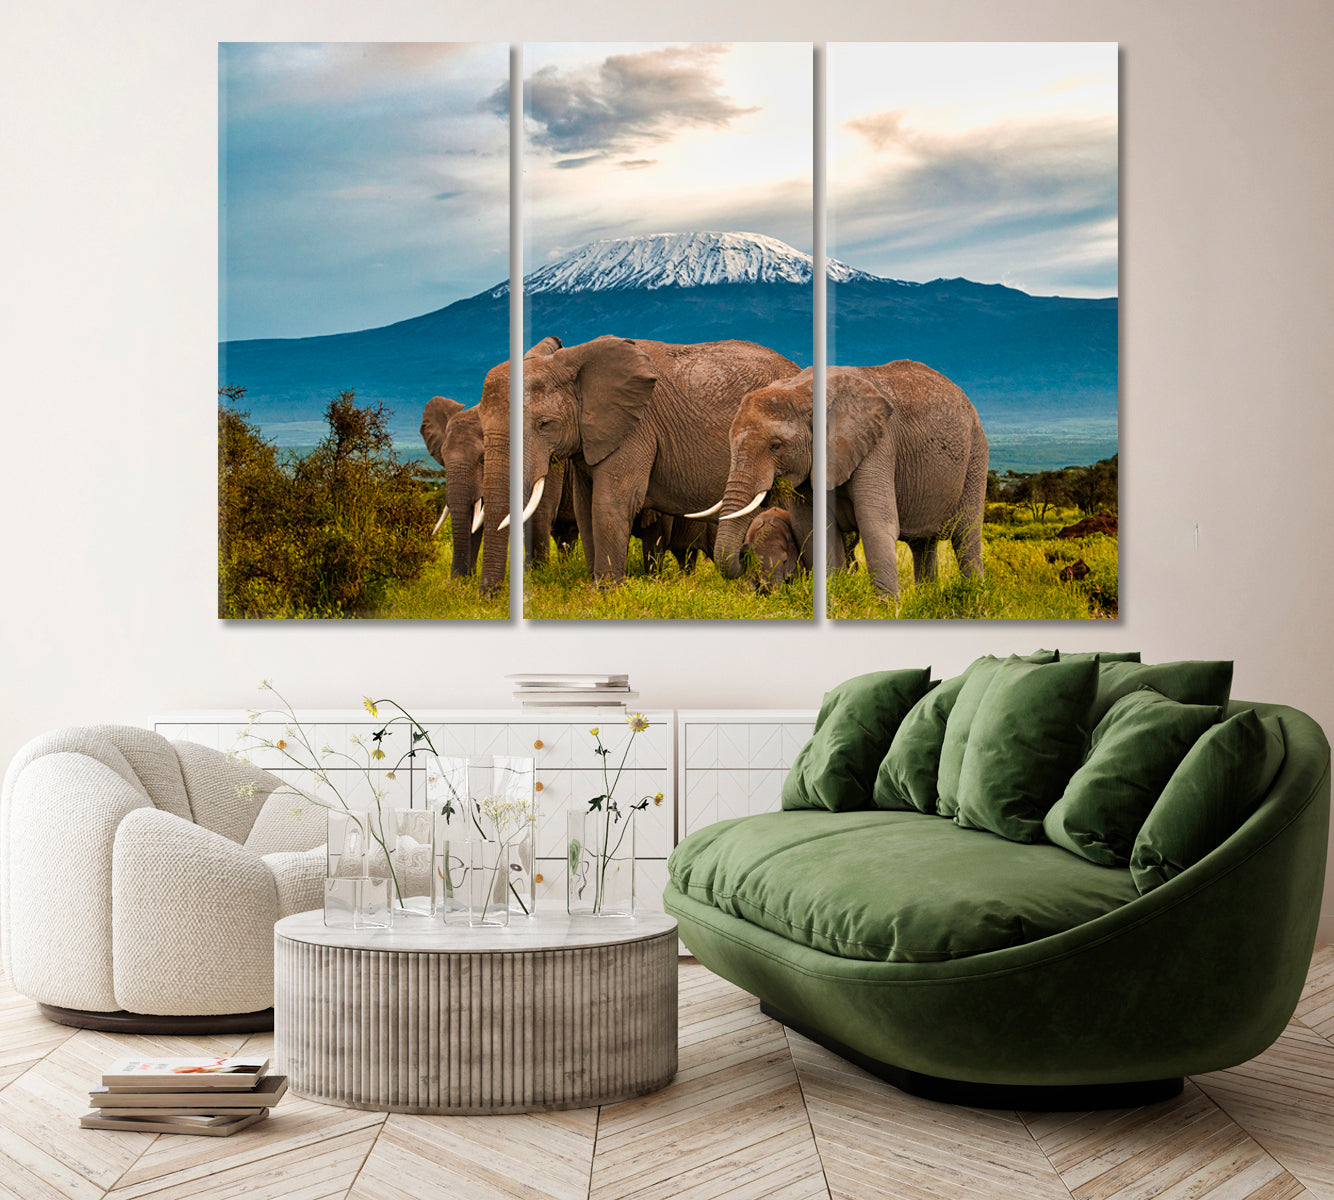 Elephants in Amboseli National Park Canvas Print ArtLexy 3 Panels 36"x24" inches 